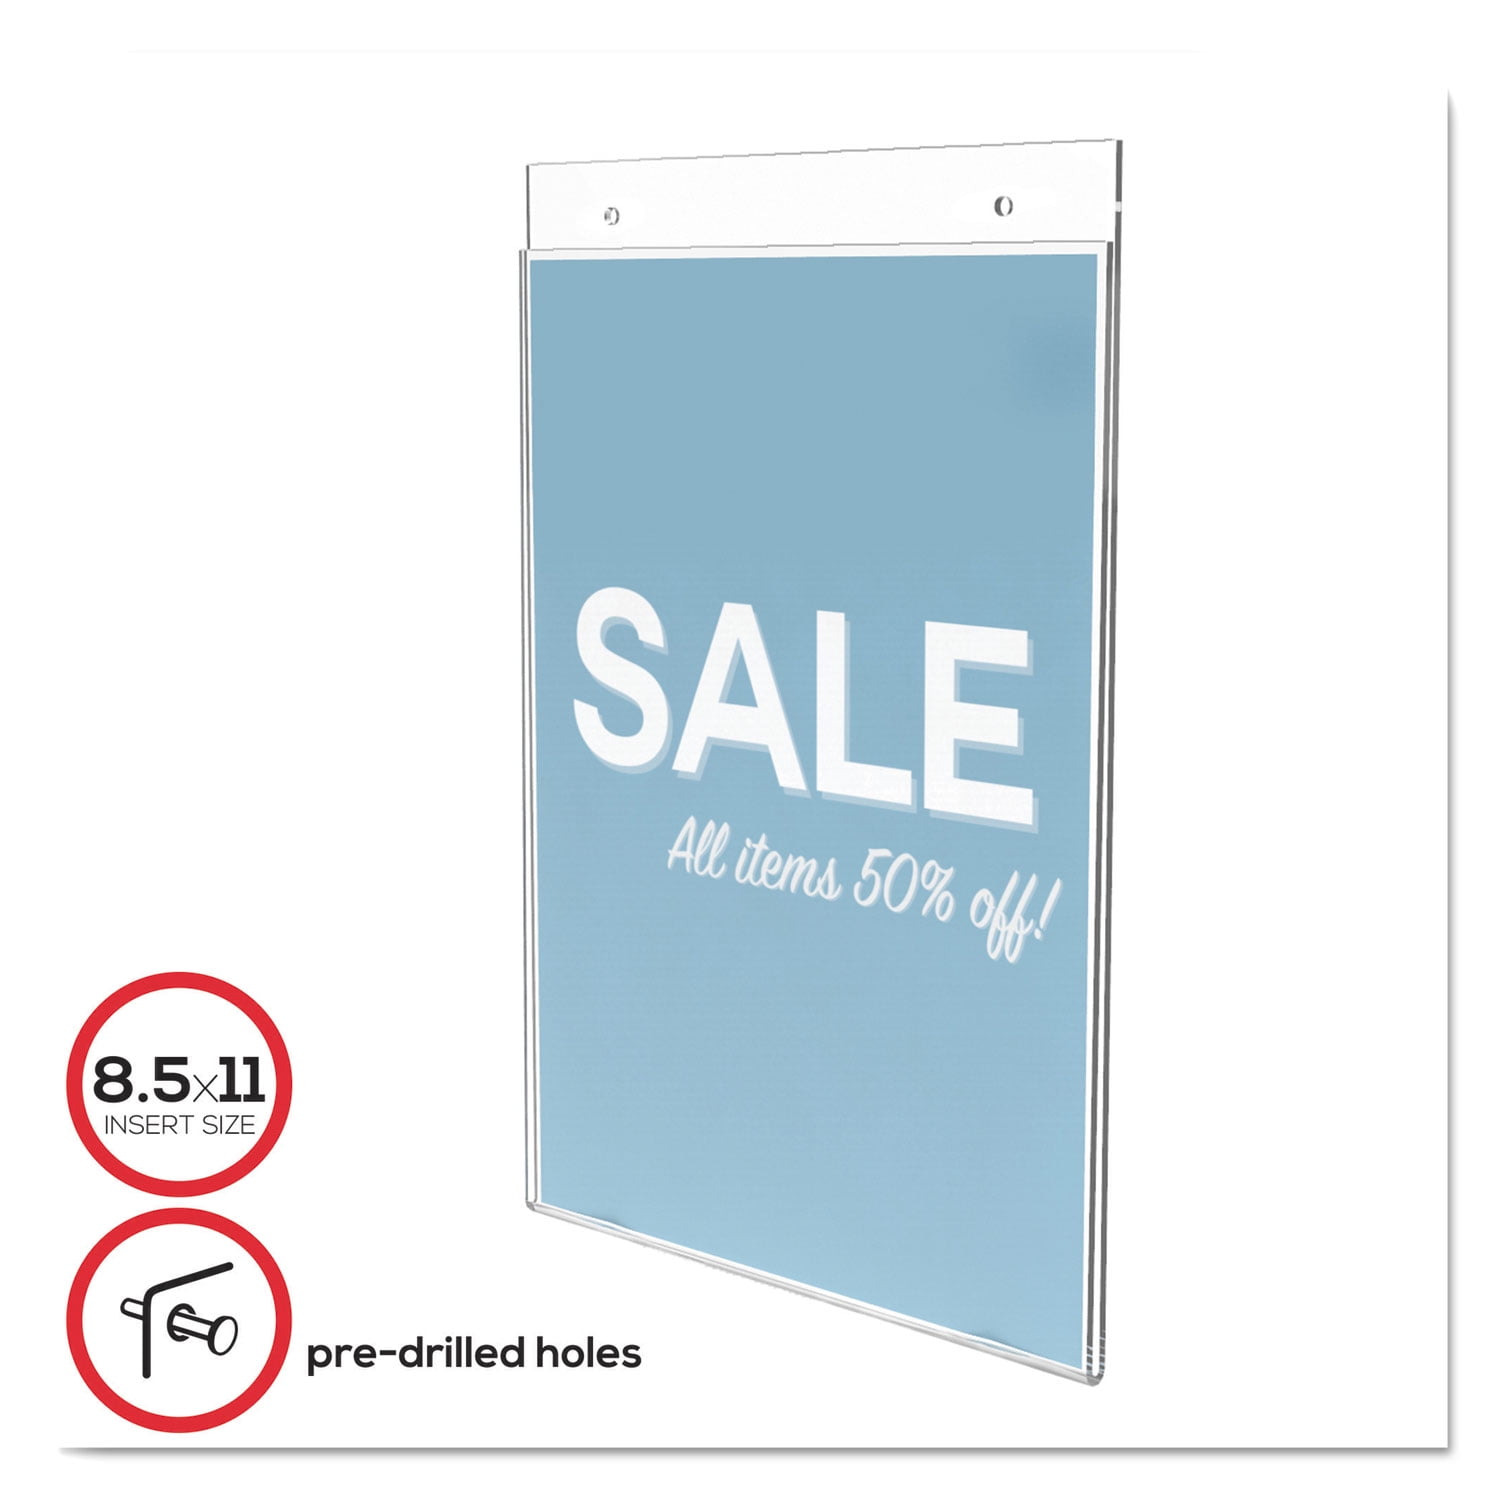 Adhesive Screws Included Paper Document Signs Menu Display Holder Horizontal,Universal 8.5x11 Clear Acrylic Sign Holder A4 Frame 6 Pack Wall Mount Sign Display Holder 11 x 8.5 for Store Office 